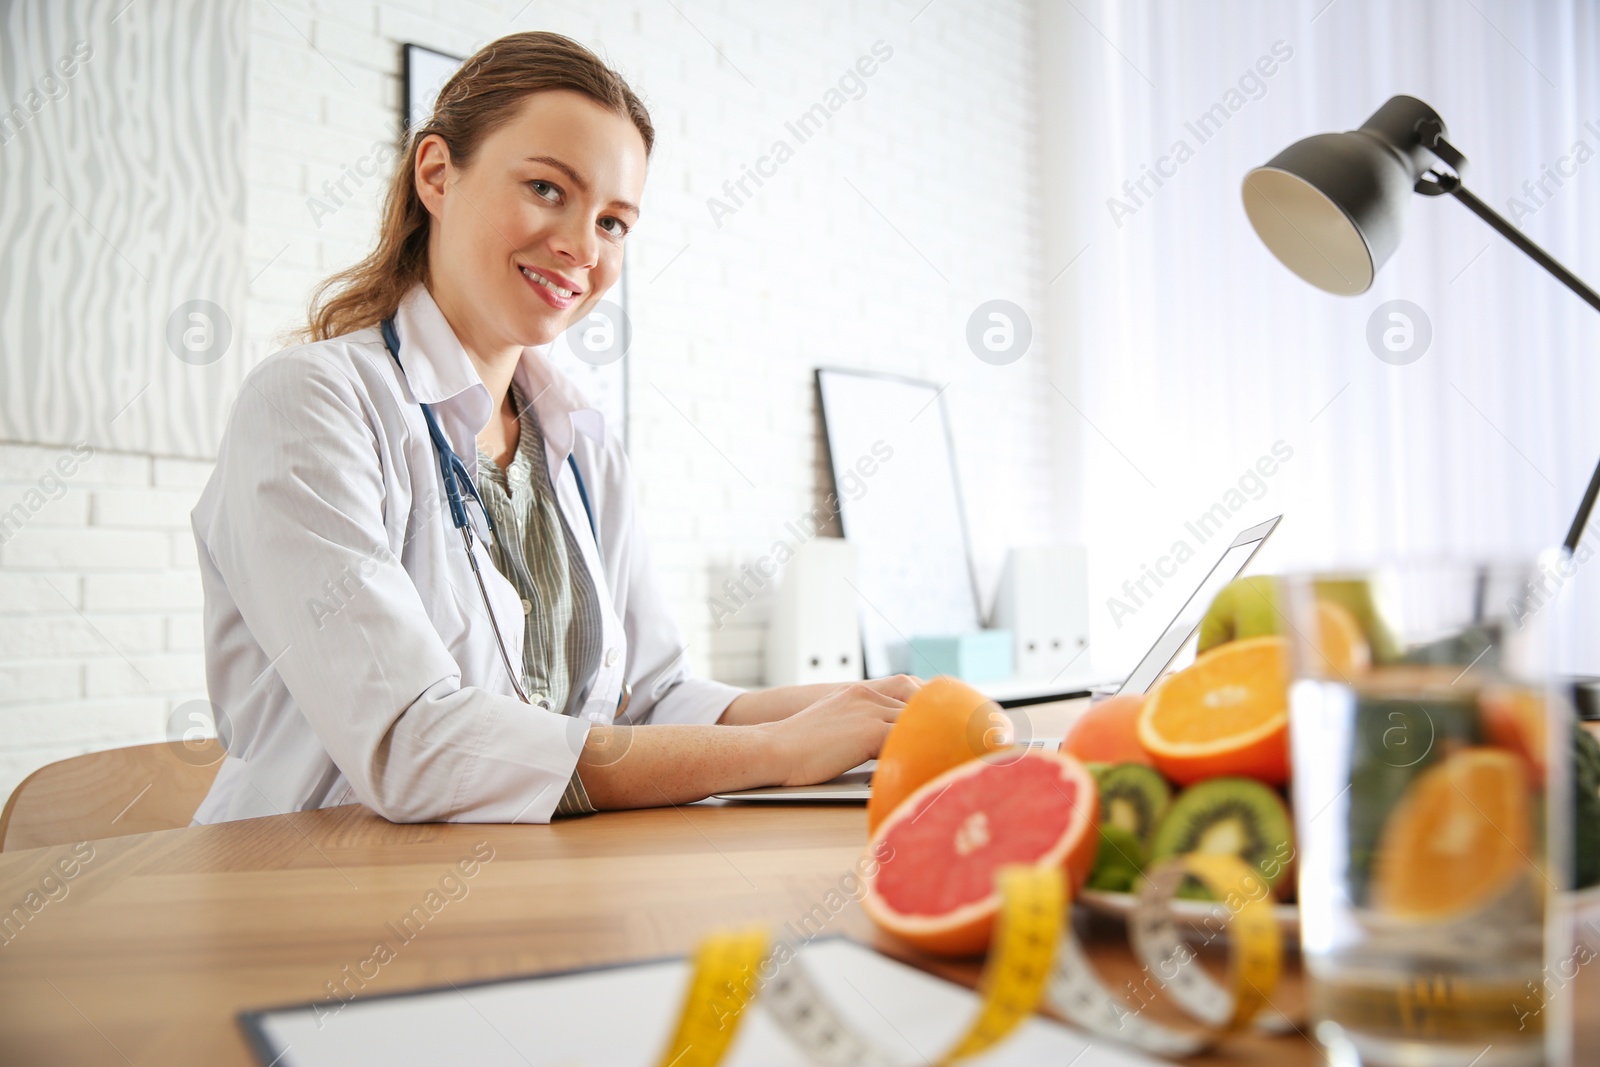 Photo of Nutritionist working with laptop at desk in office